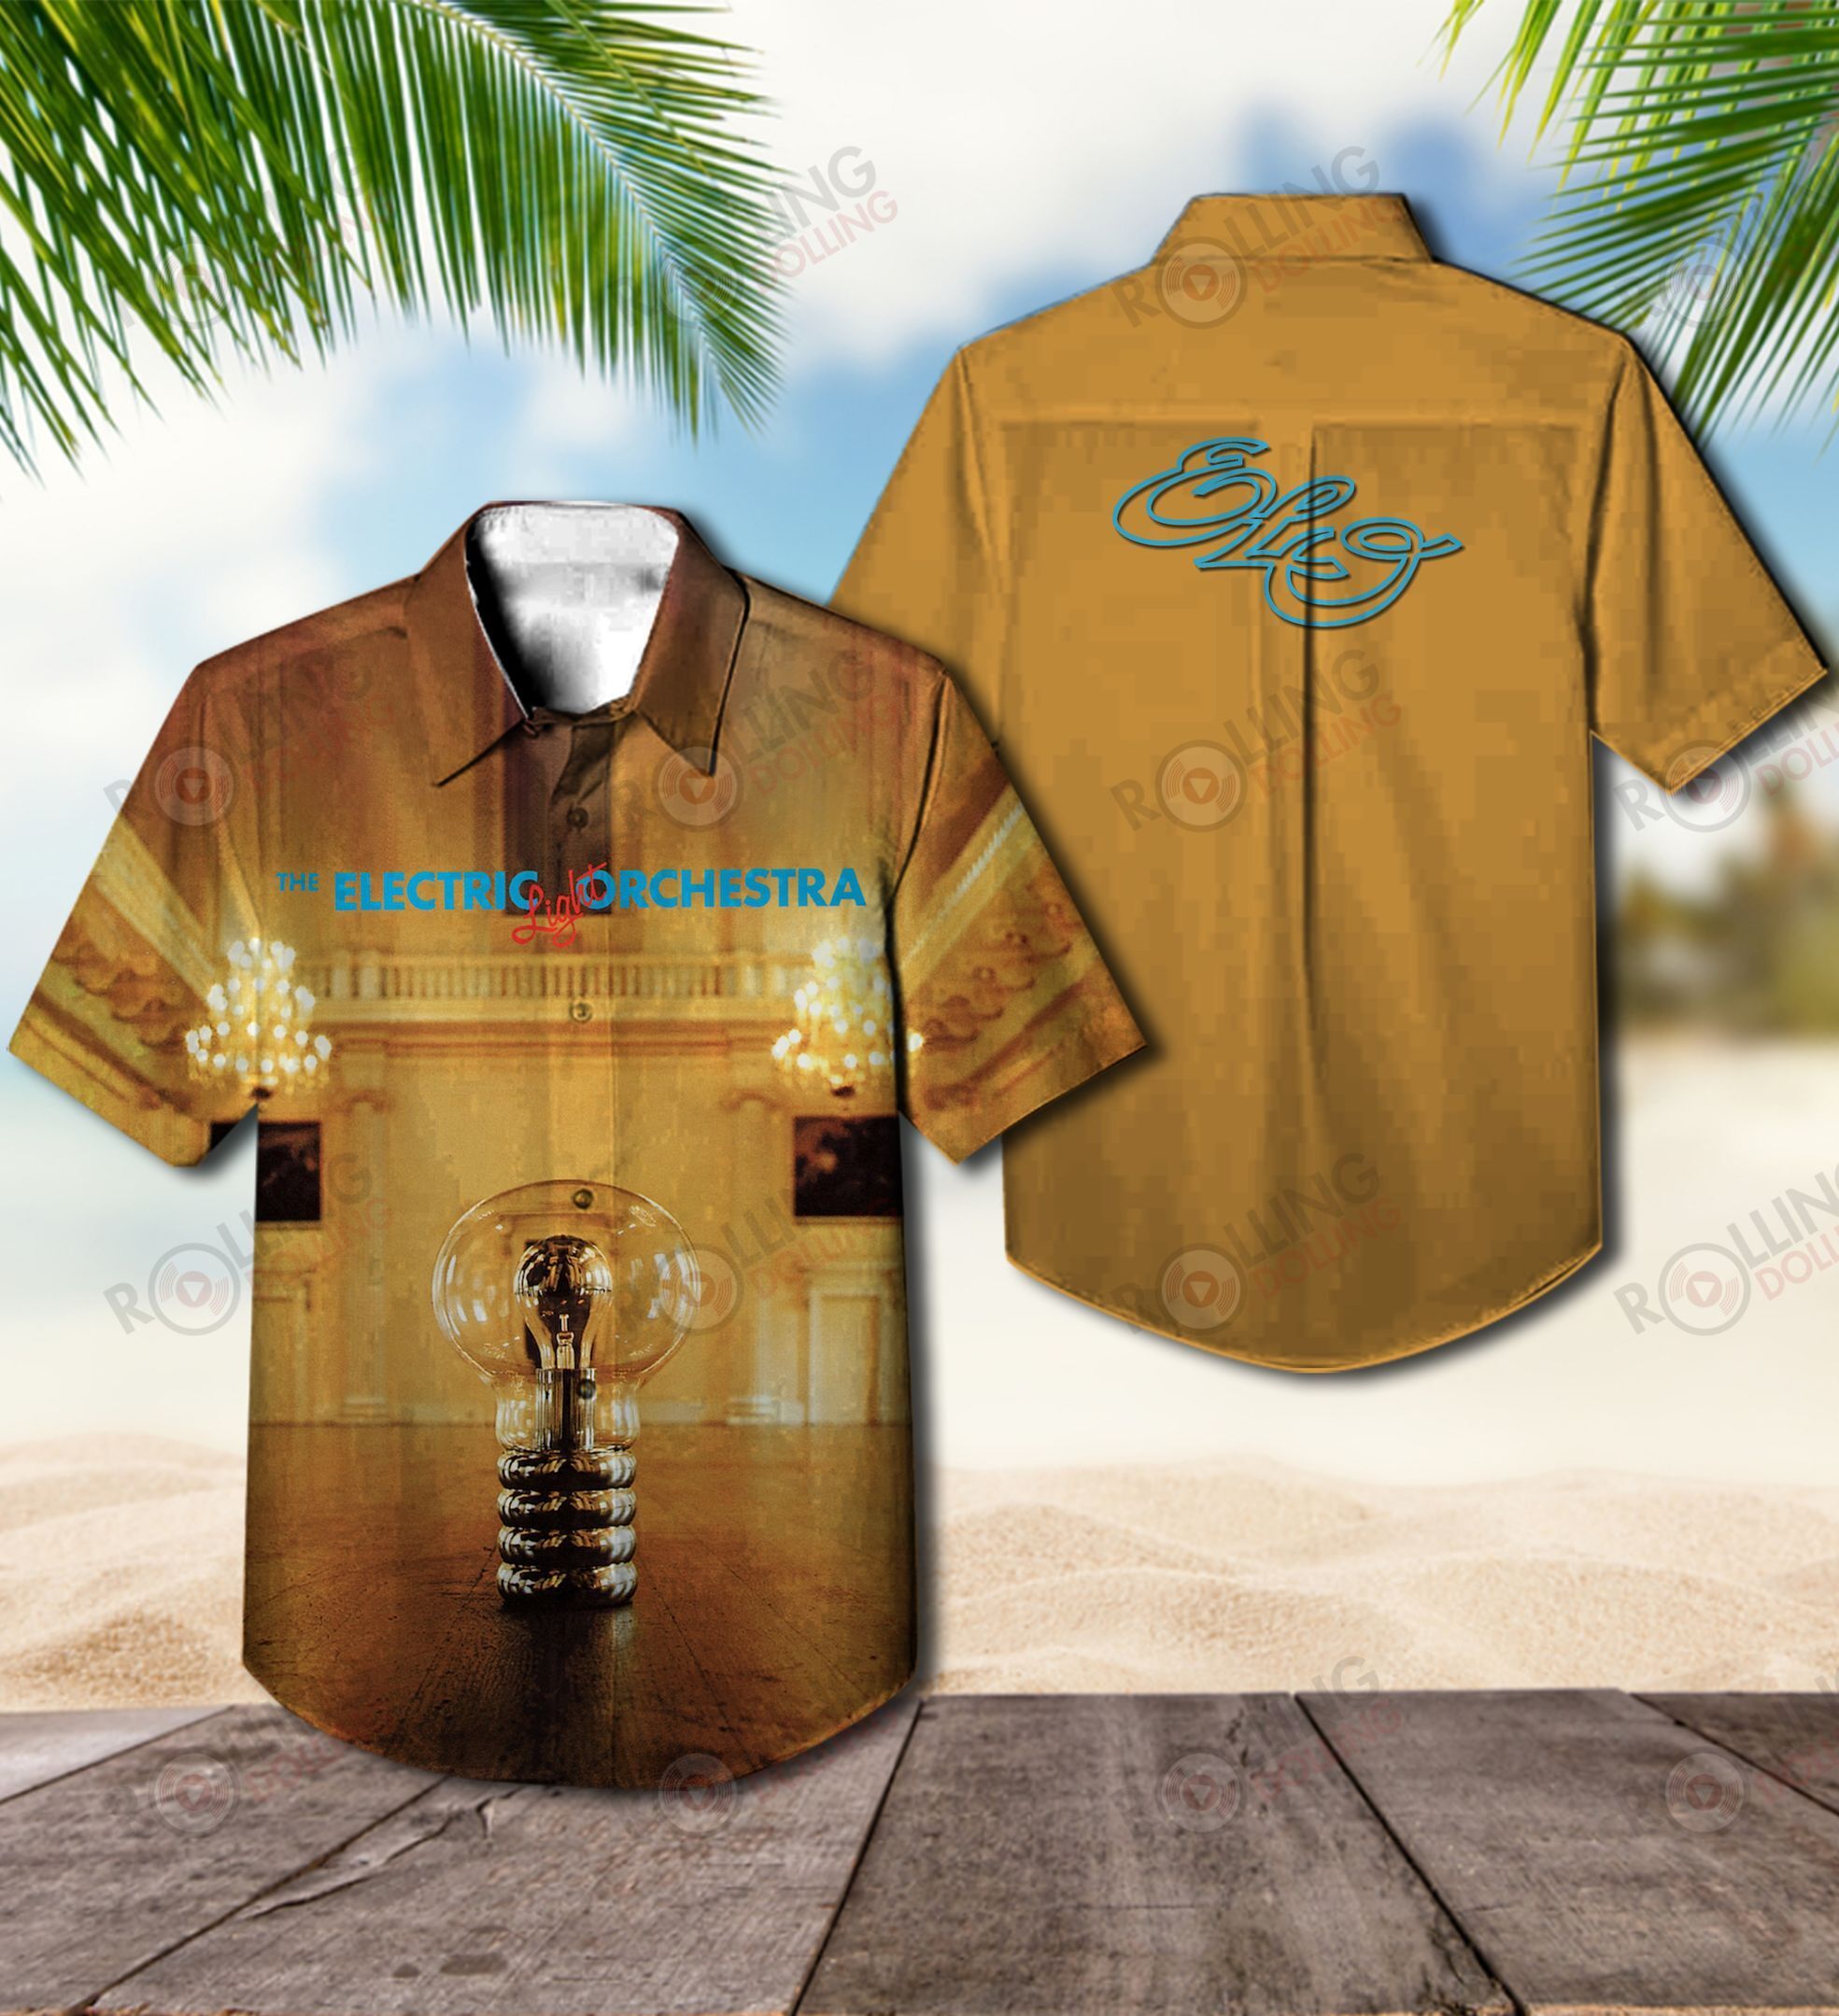 You'll have the perfect vacation outfit with this Hawaiian shirt 203